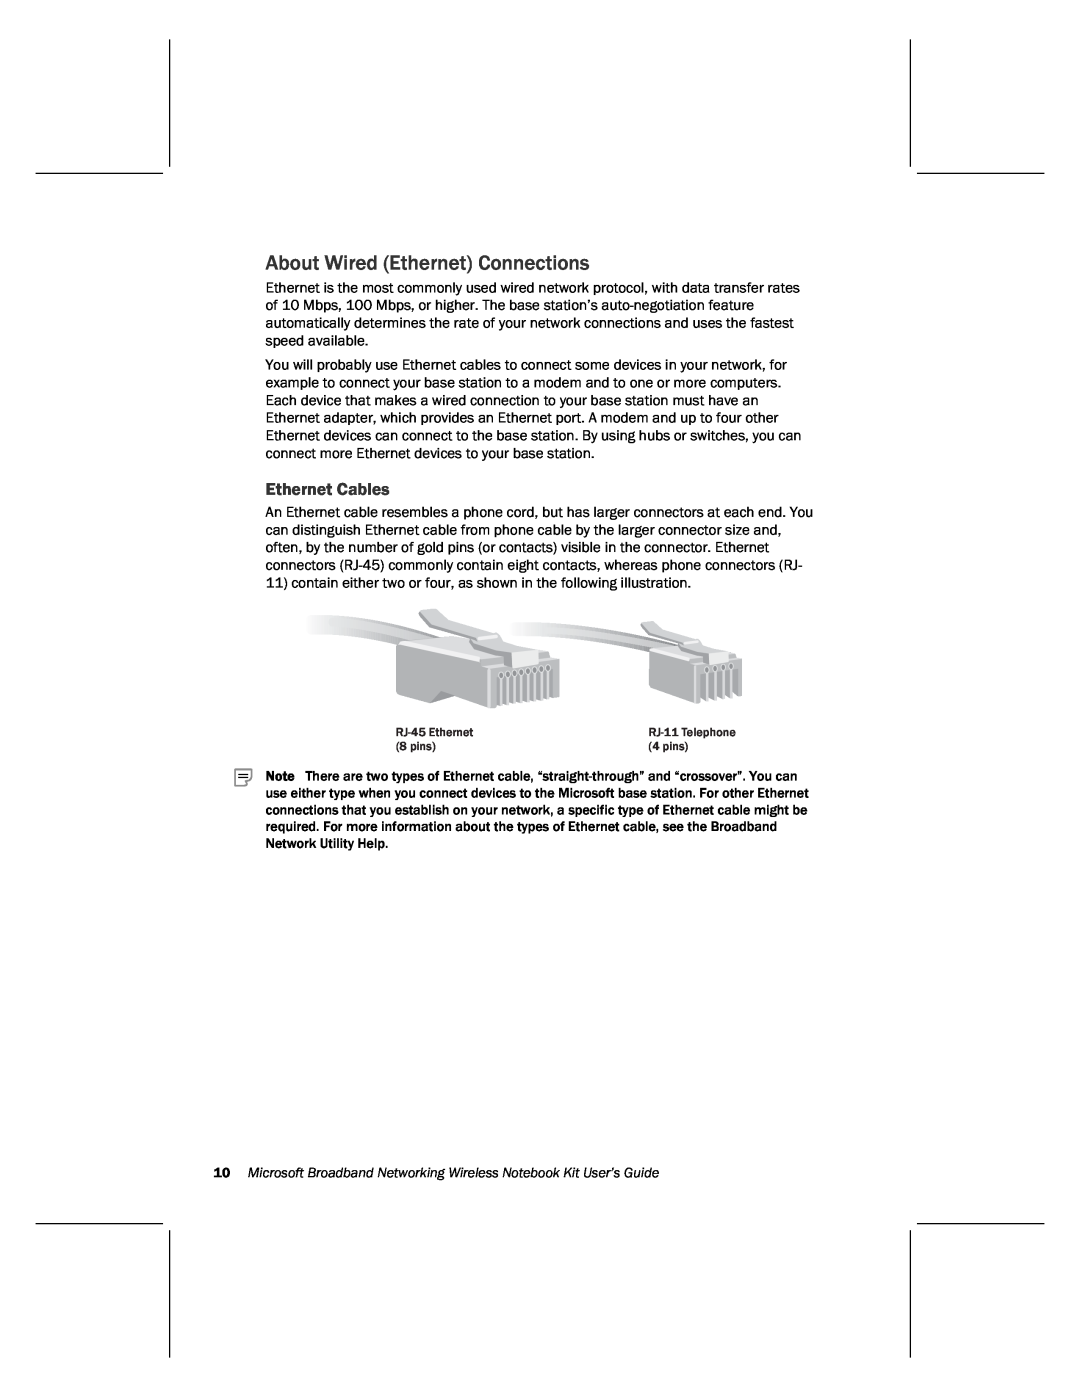 Microsoft MN-820 manual About Wired Ethernet Connections, Ethernet Cables 